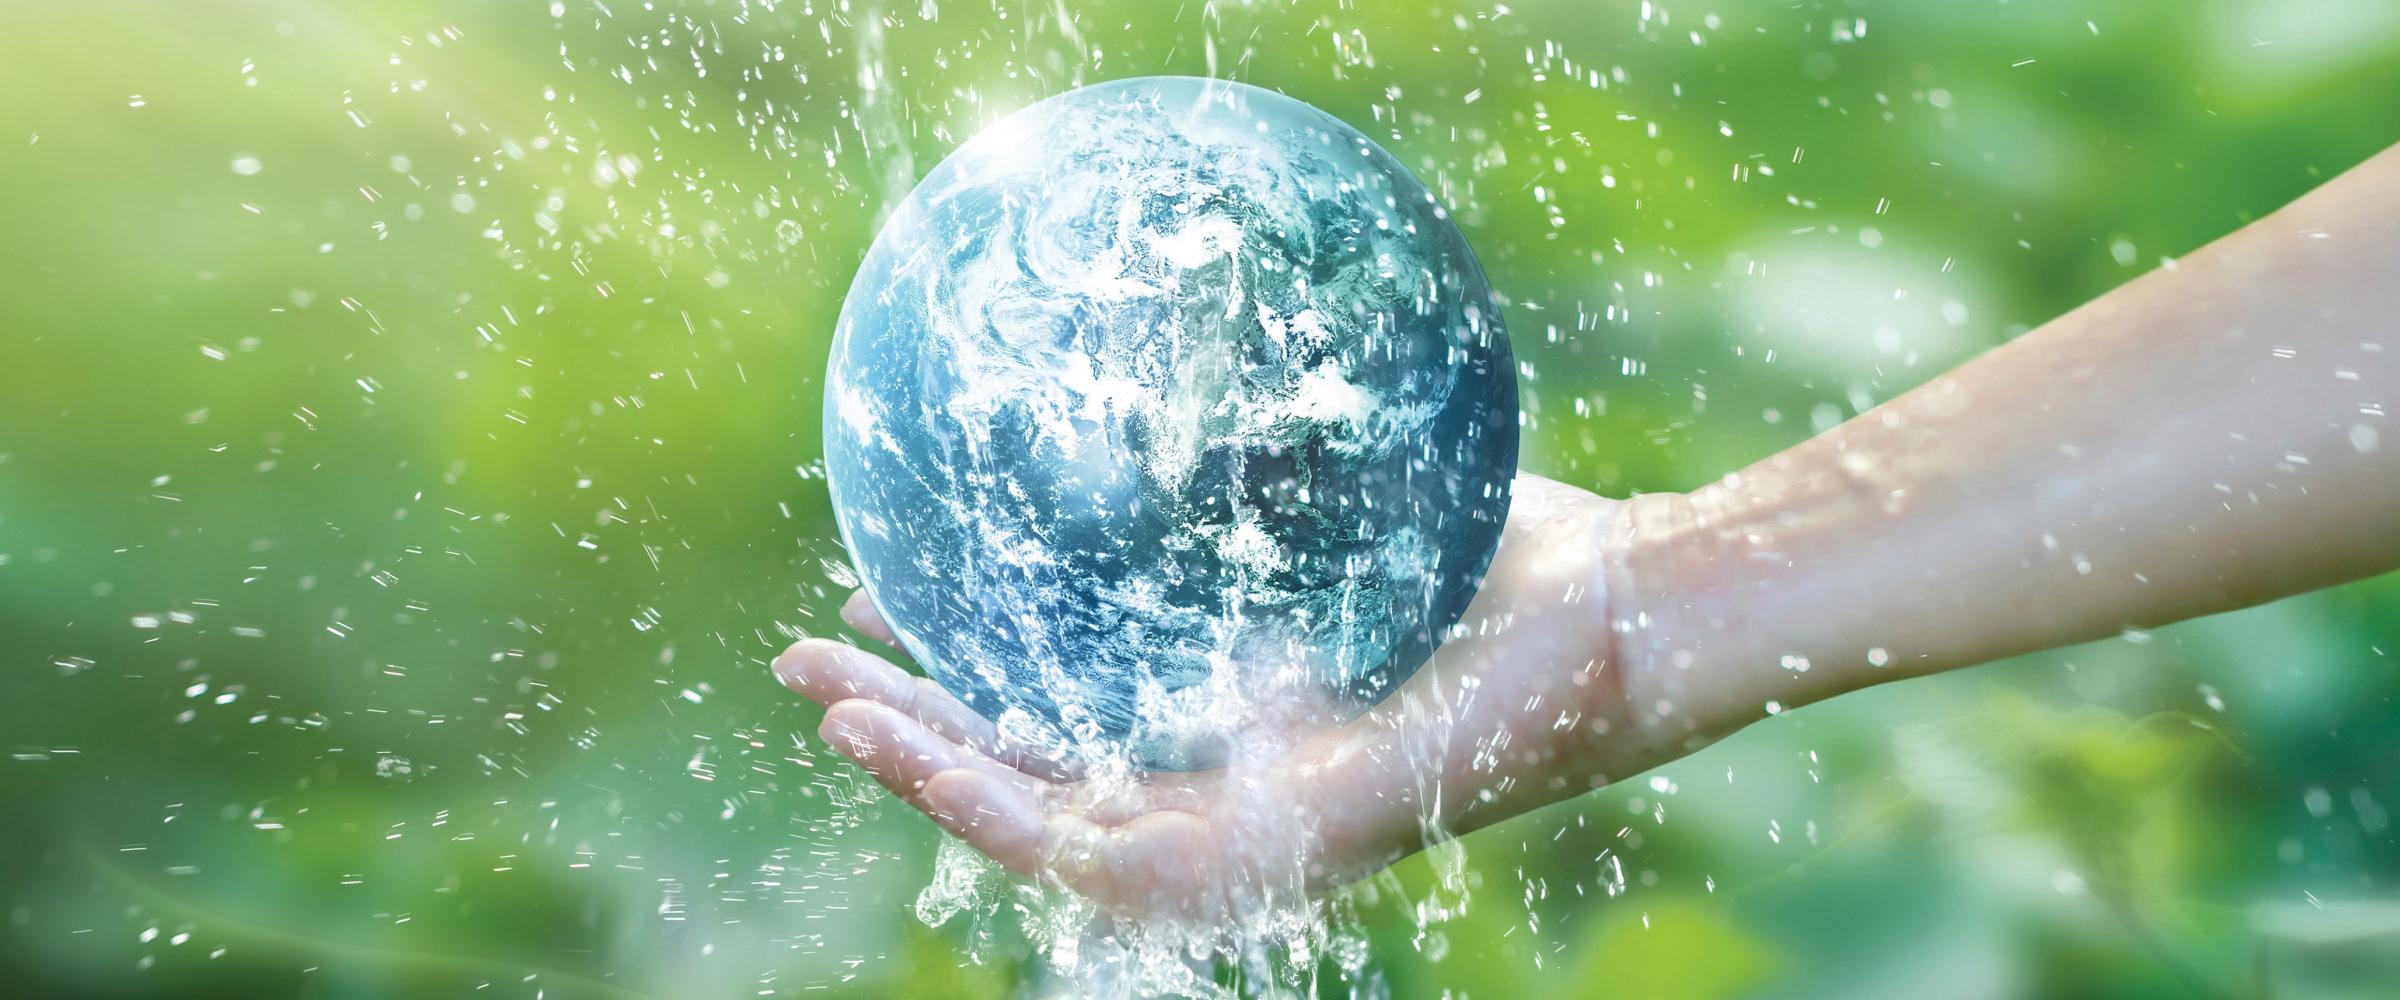 Digital rendering of an outstretch arm holding a softball-sized Earth with splashing water around the frame